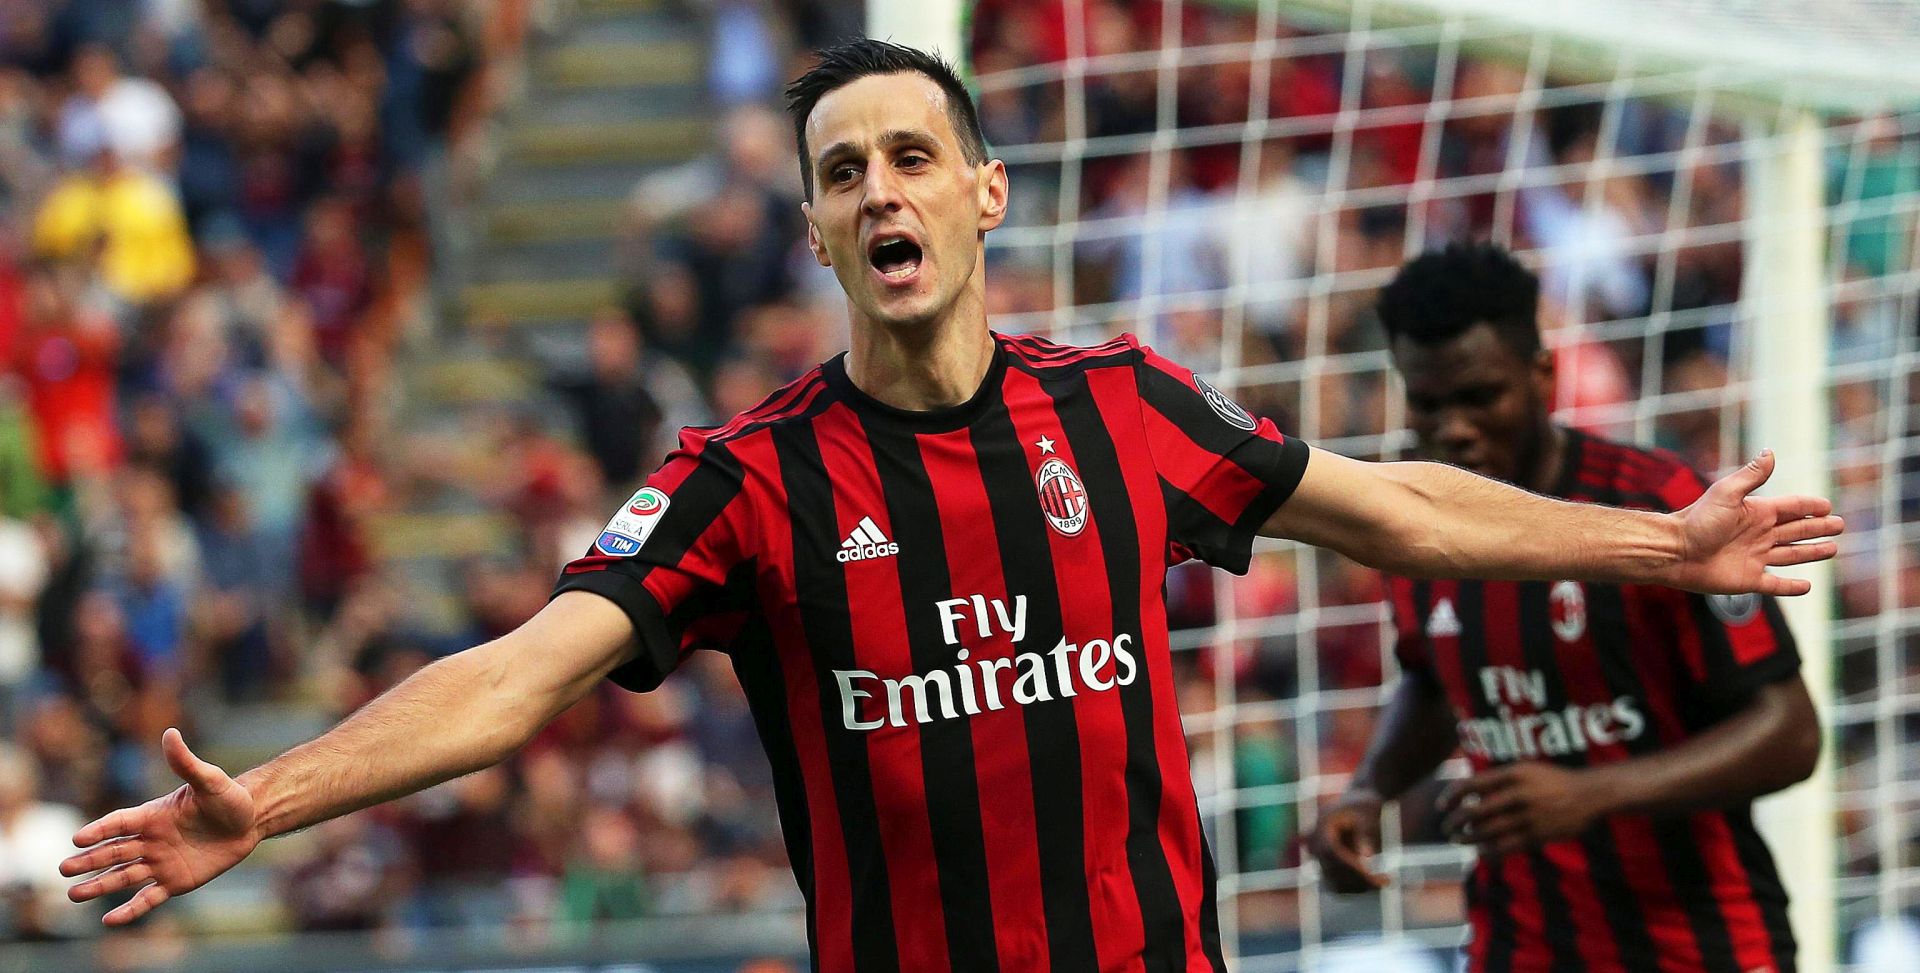 epa06938276 (FILE) - Milan's forward Nikola Kalinic celebrates after scoring the 1-0 lead during the Italian Serie A soccer match between AC Milan and Udinese Calcio at Giuseppe Meazza stadium in Milan, Italy, 17 September 2017 (re-issued 09 August 2018). Kalinic signed a three-year contract at Spanish Primera Division side Atletico Madrid, Spanish media reports stated on 09 August 2018.  EPA/MATTEO BAZZI *** Local Caption *** 53774159